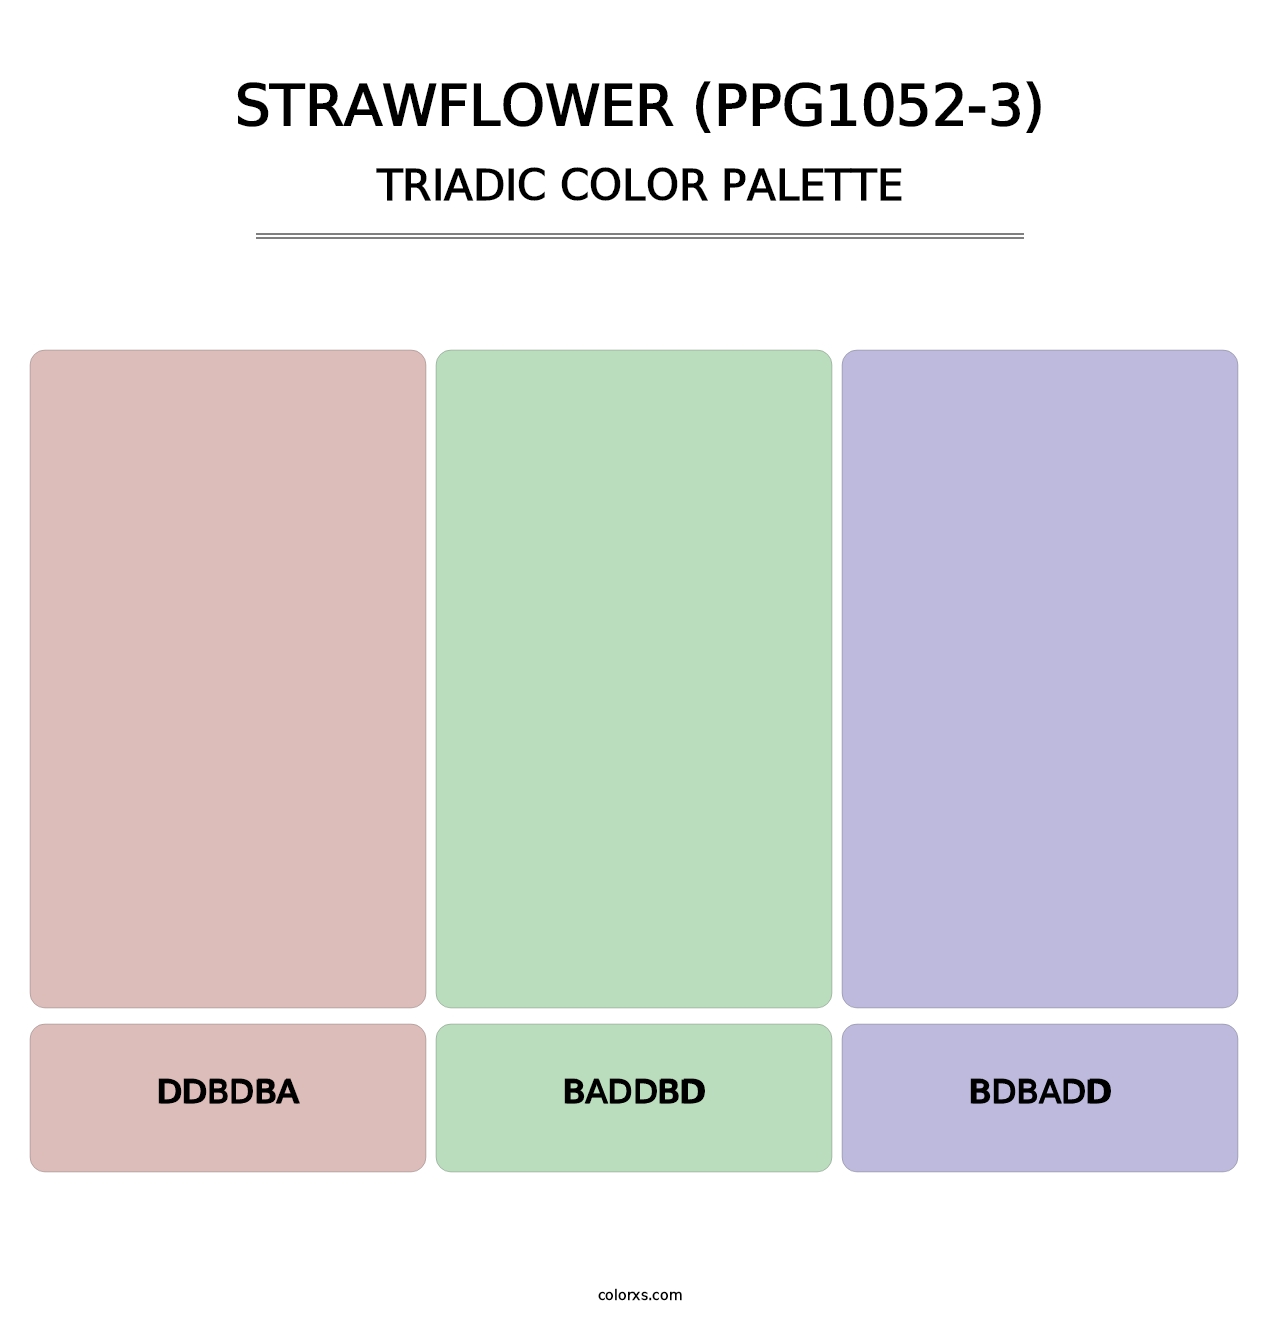 Strawflower (PPG1052-3) - Triadic Color Palette